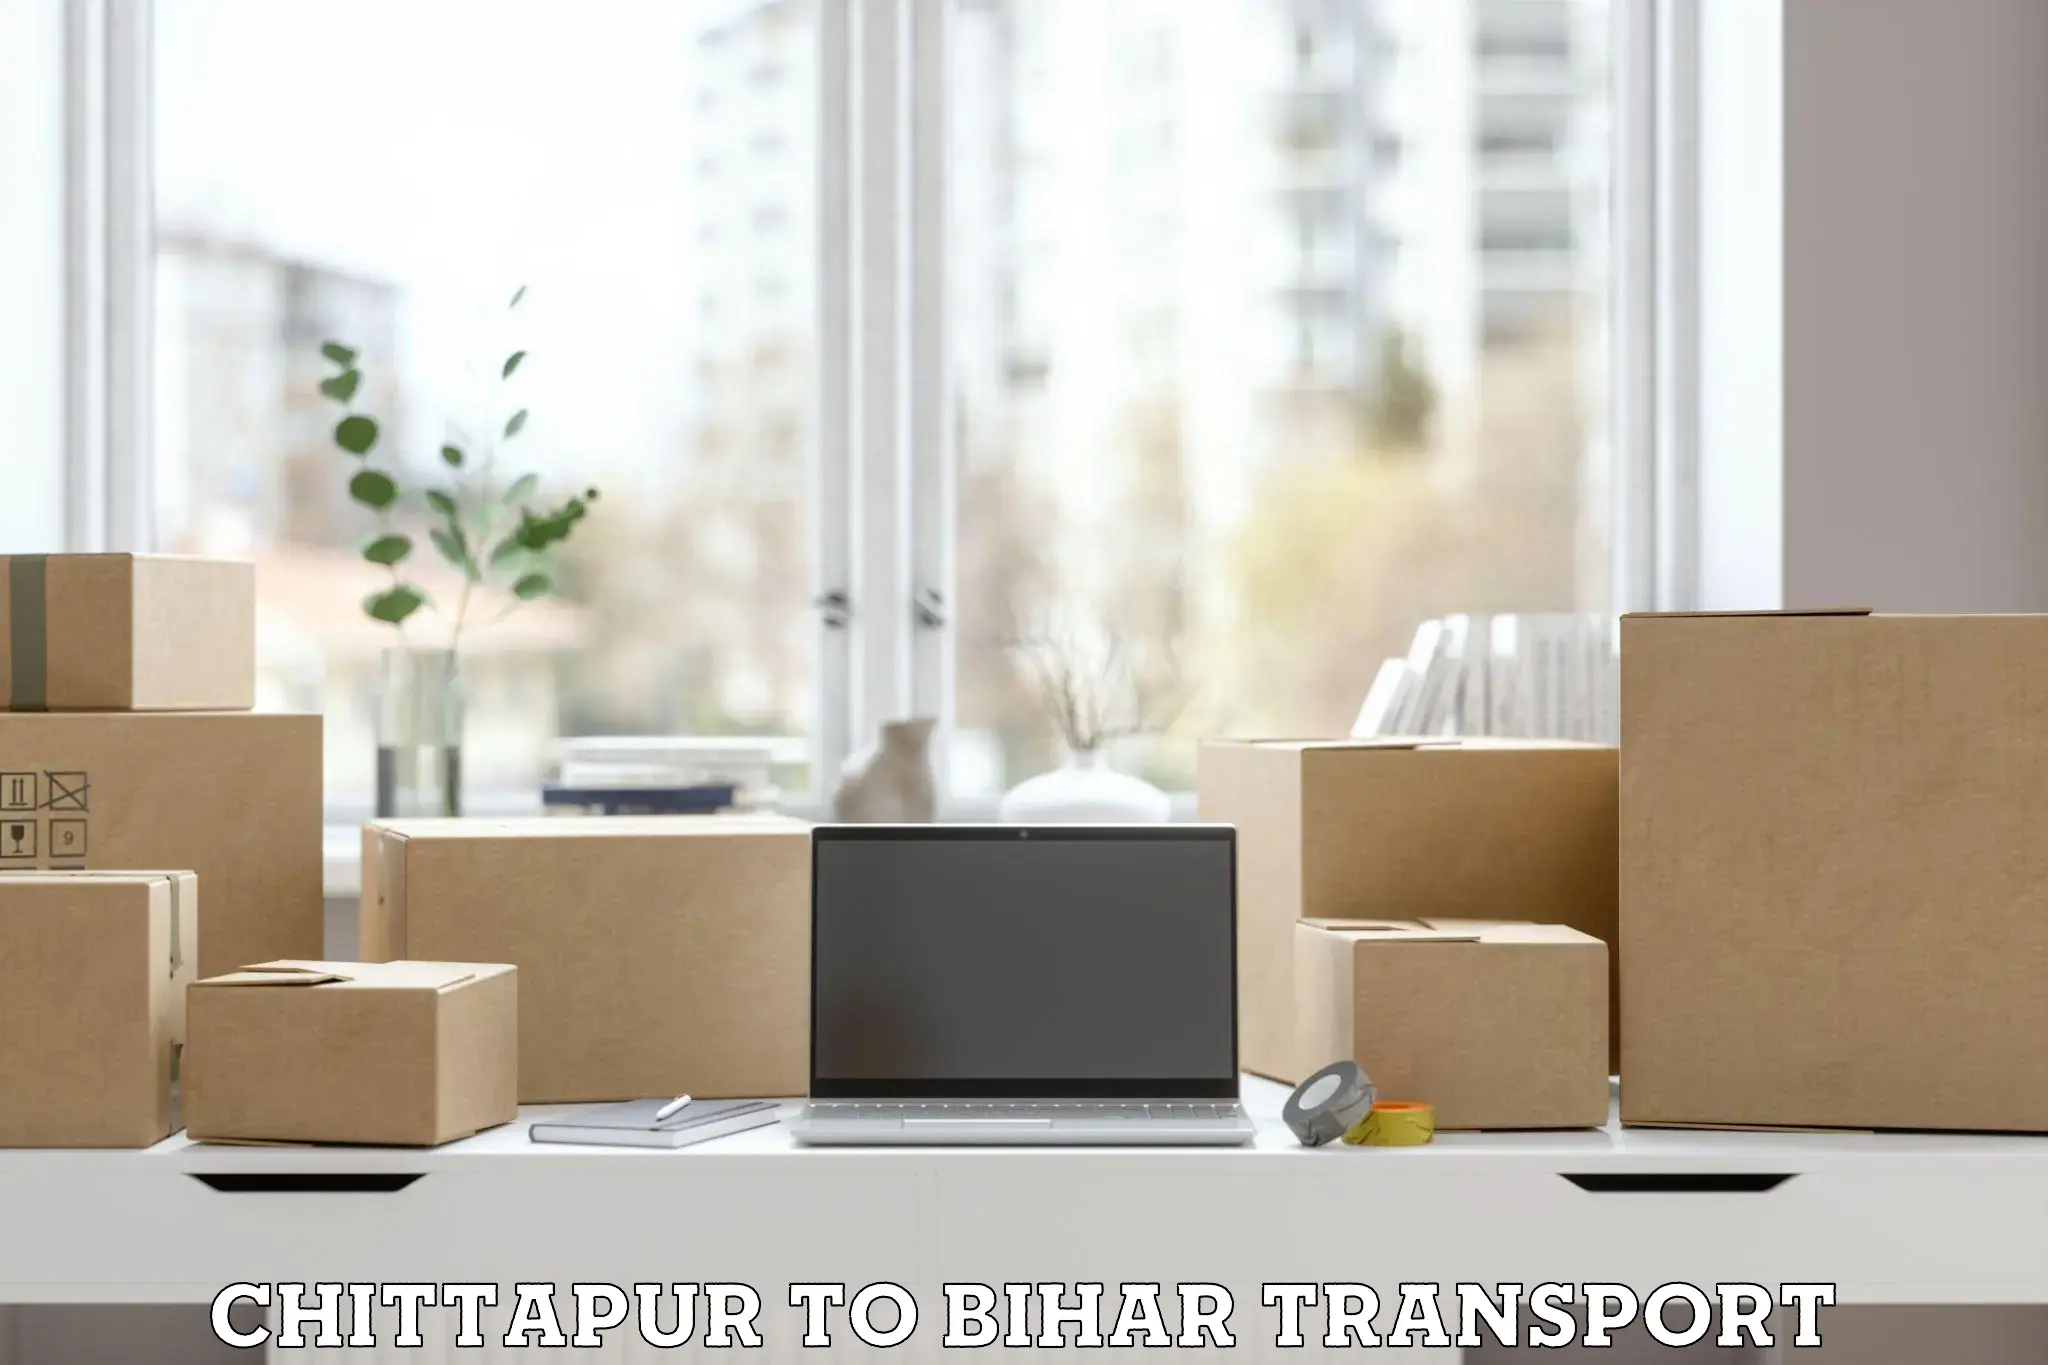 Express transport services in Chittapur to Mahaddipur